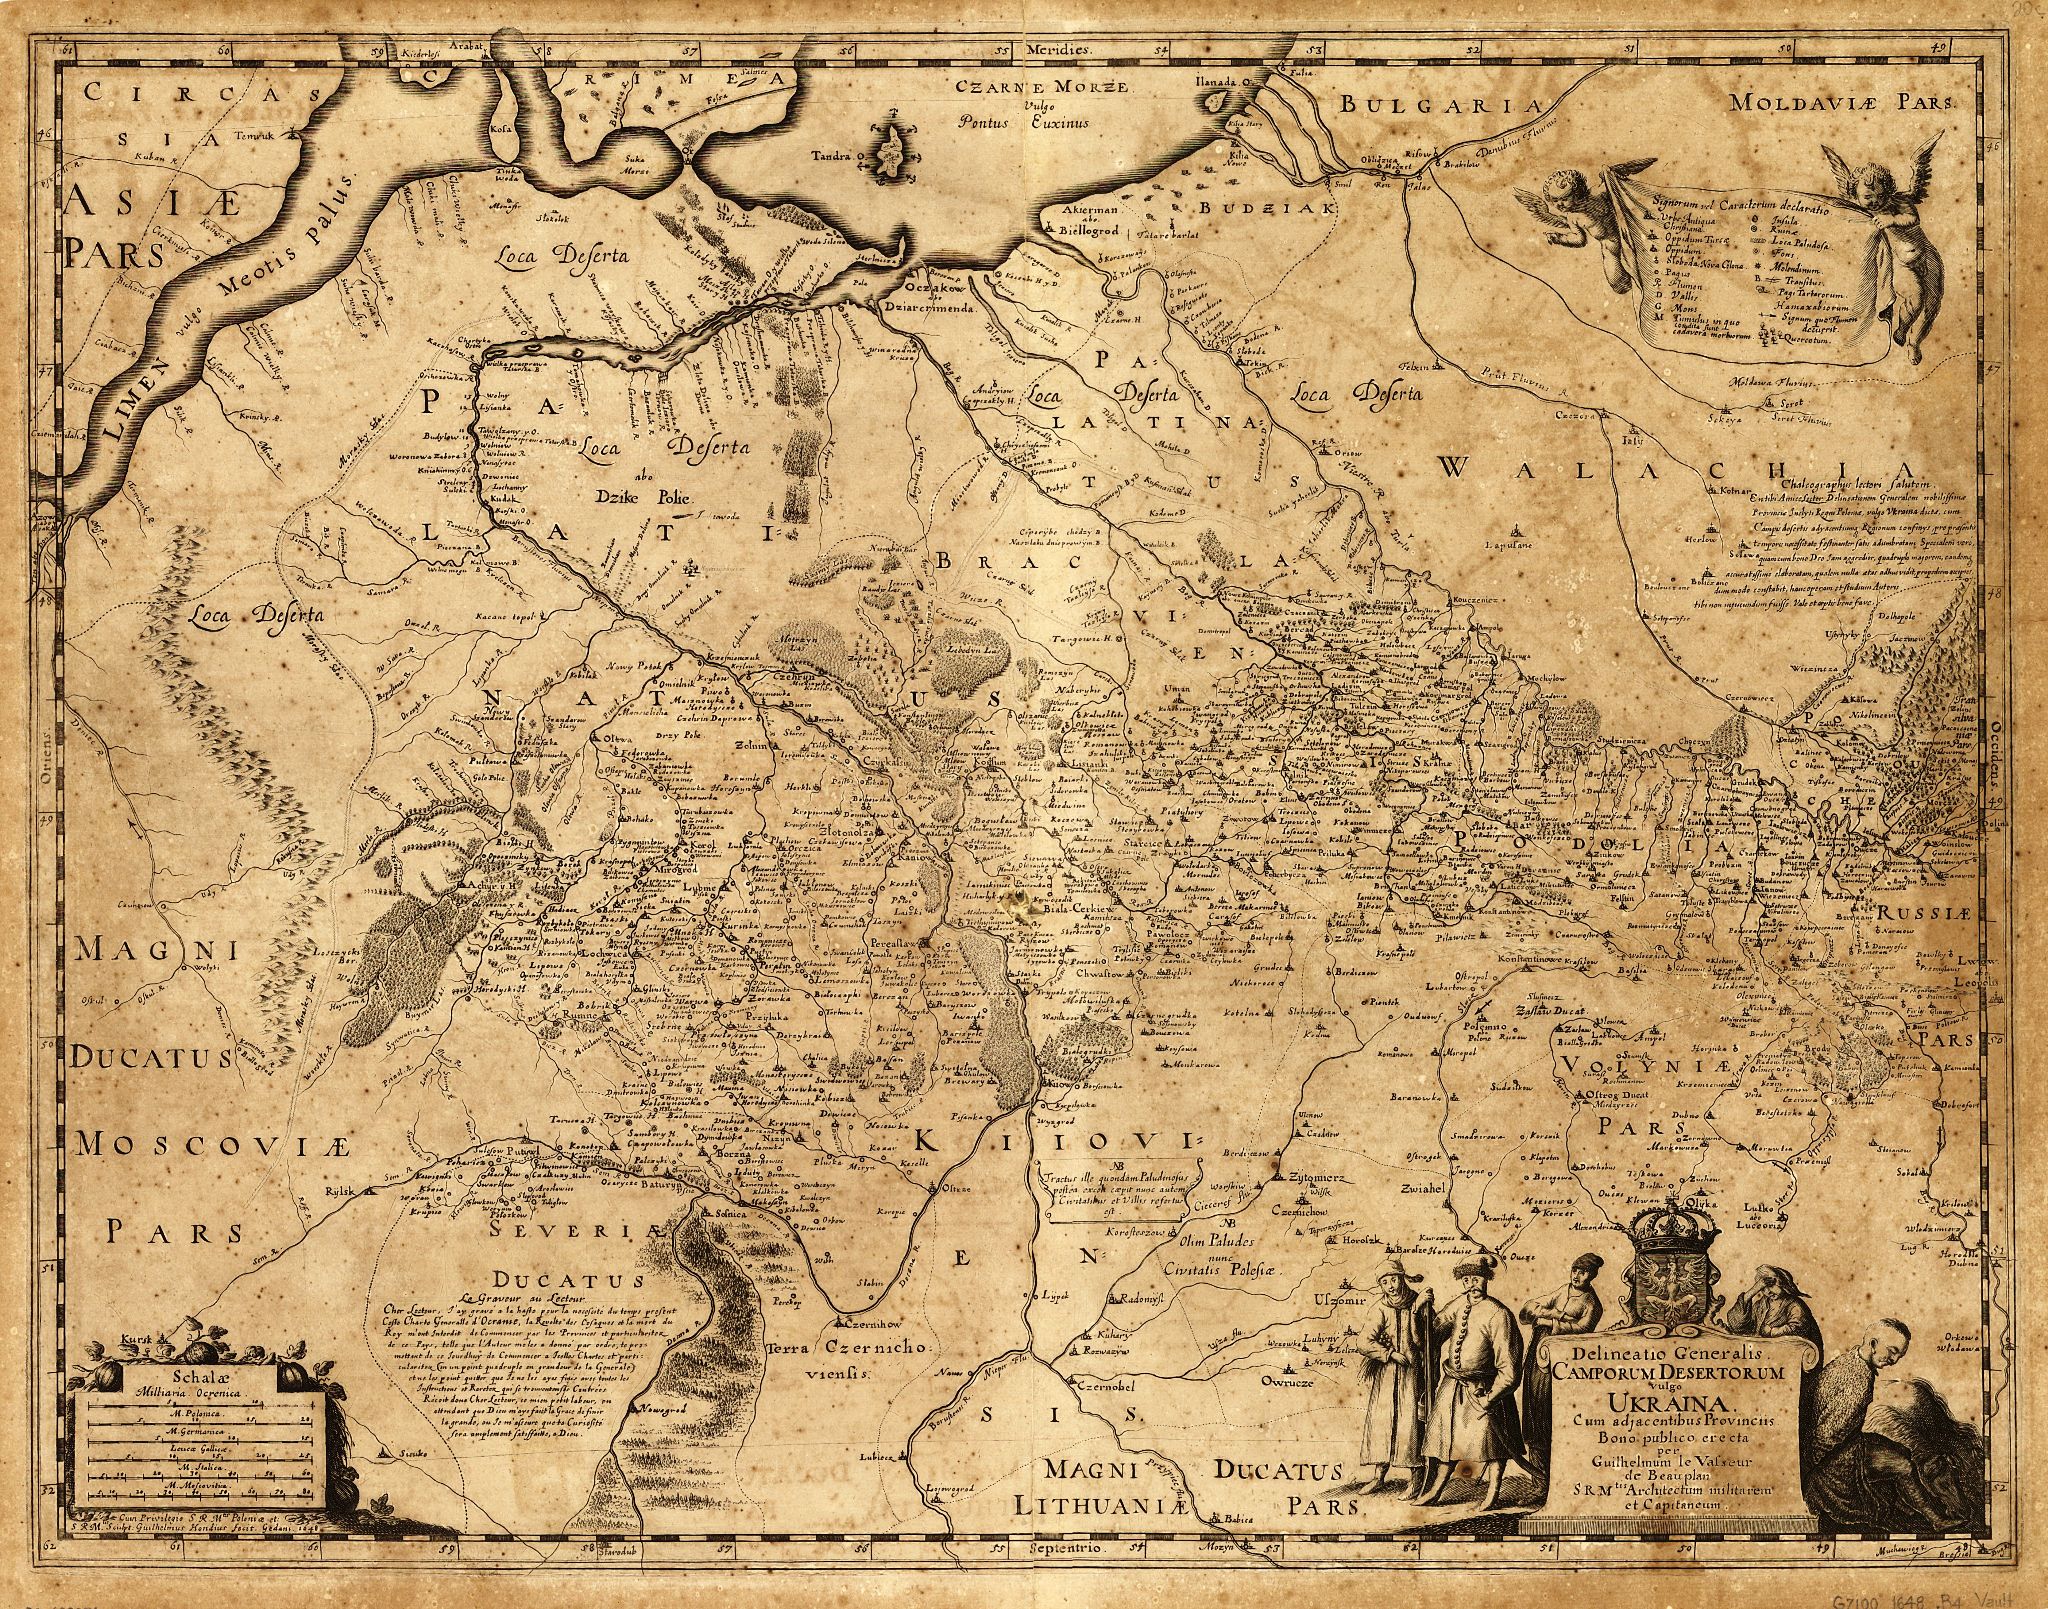 17th-century map of Ukraine by a French-Polish cartographer, engineer, and architect William le Vasseur de Beauplan, who also wrote his famous “Description of Ukraine” with the full name “Description of Ukraine — several provinces of the Kingdom of Poland, stretching from the borders of Moscovia to the borders of Transylvania, together with their customs, way of life and warfare.” The map is oriented to the south, while Moscovia is depicted in the bottom left corner. ~